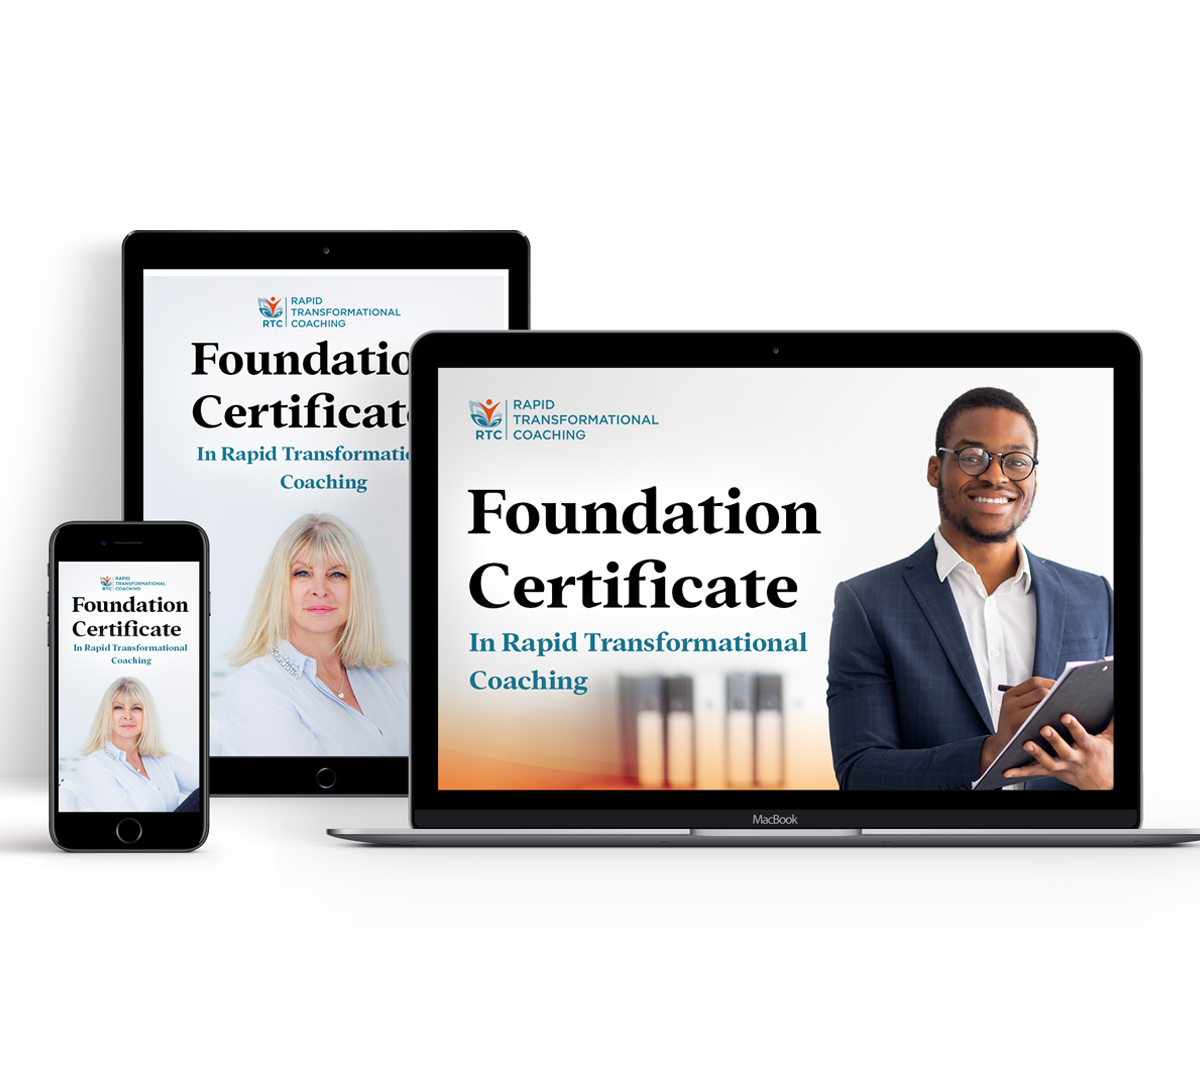 Foundation Certificate in Rapid Transformational Coaching